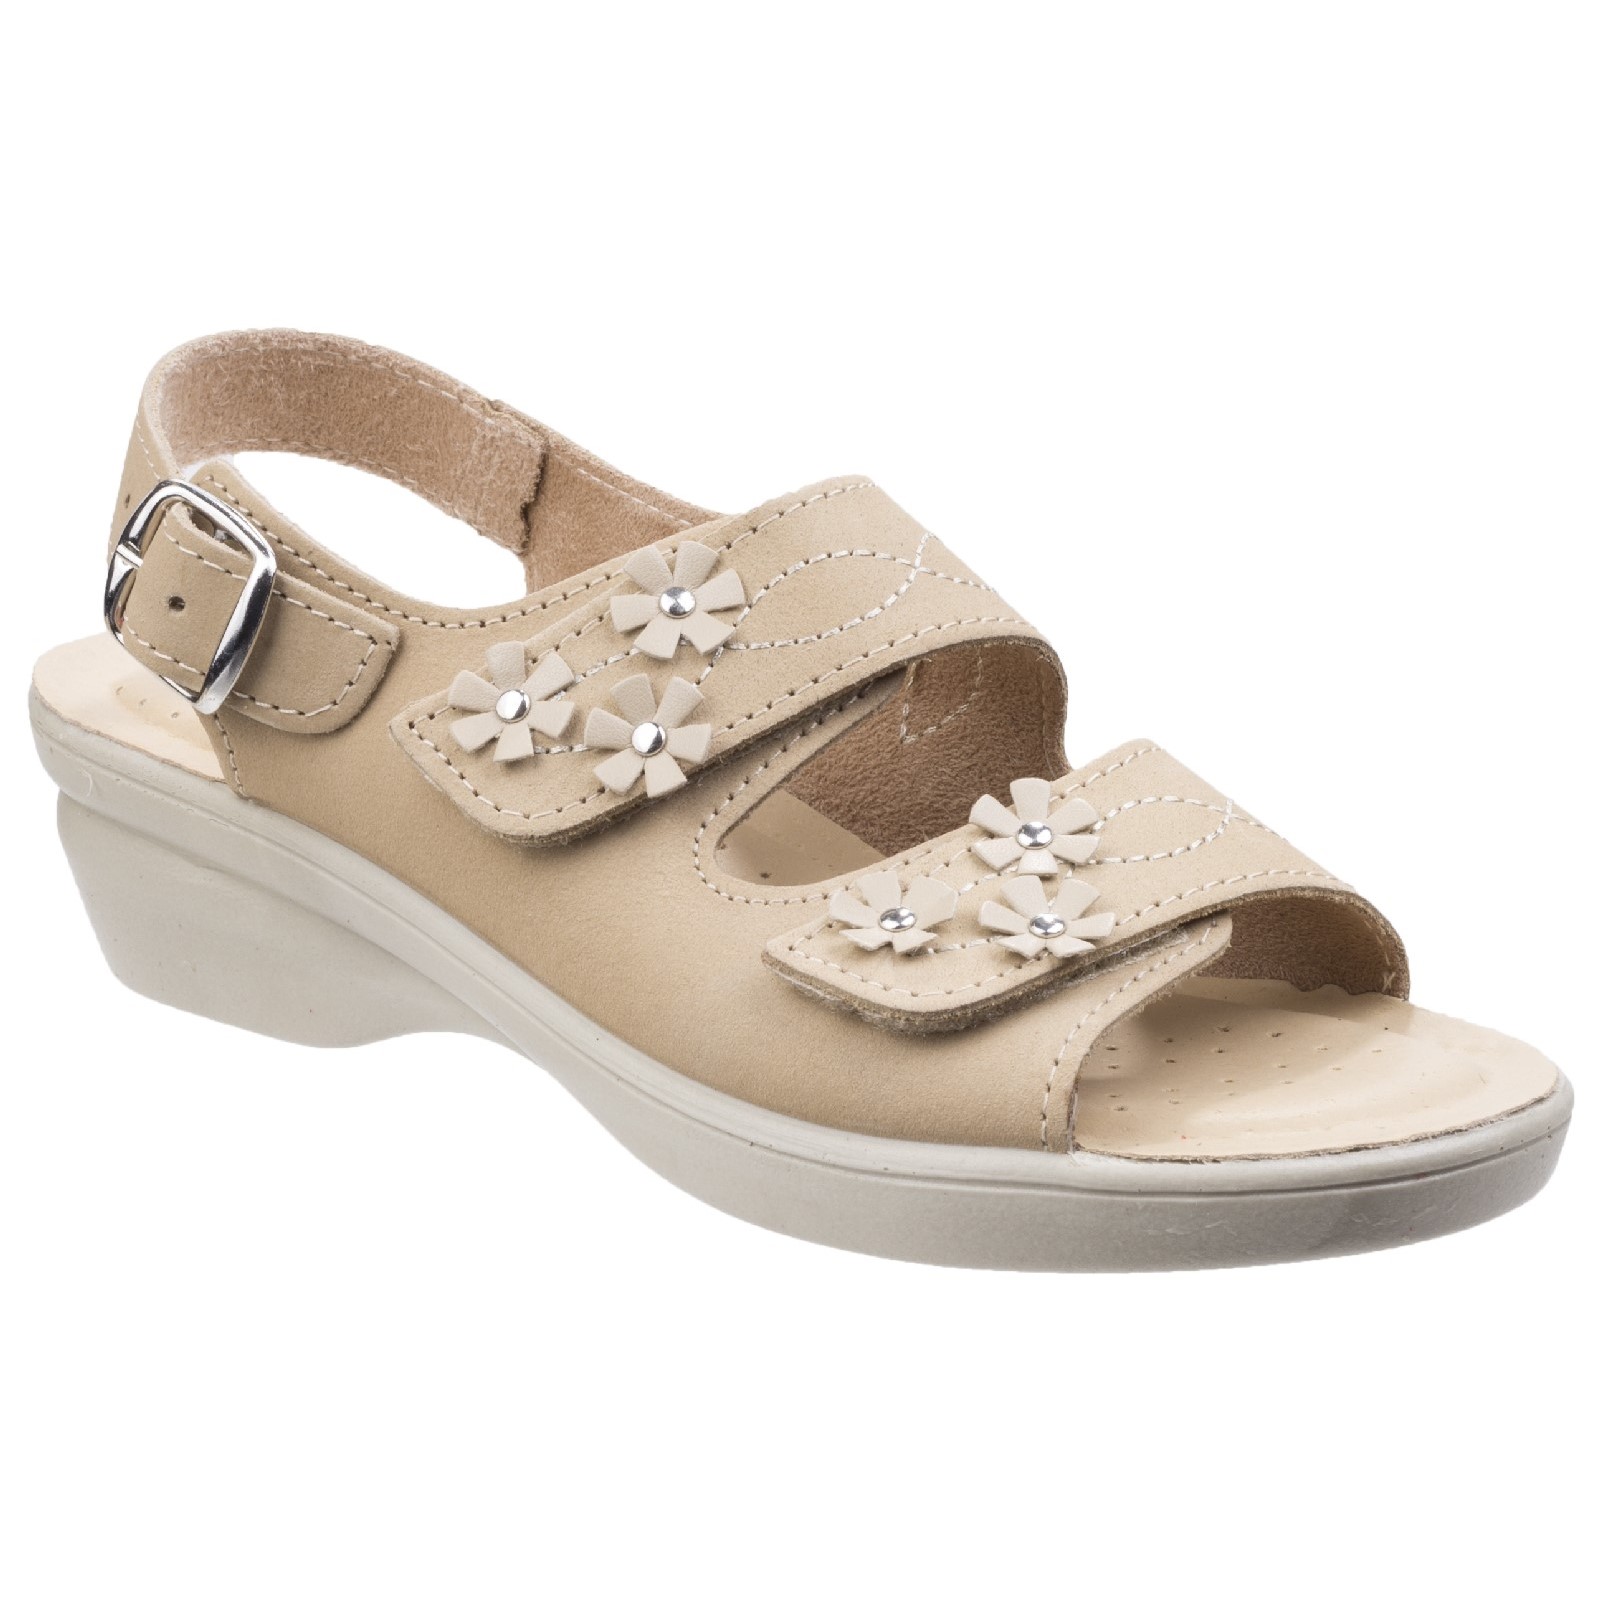 Amaretto Women's Touch Fastening Leather Sandal